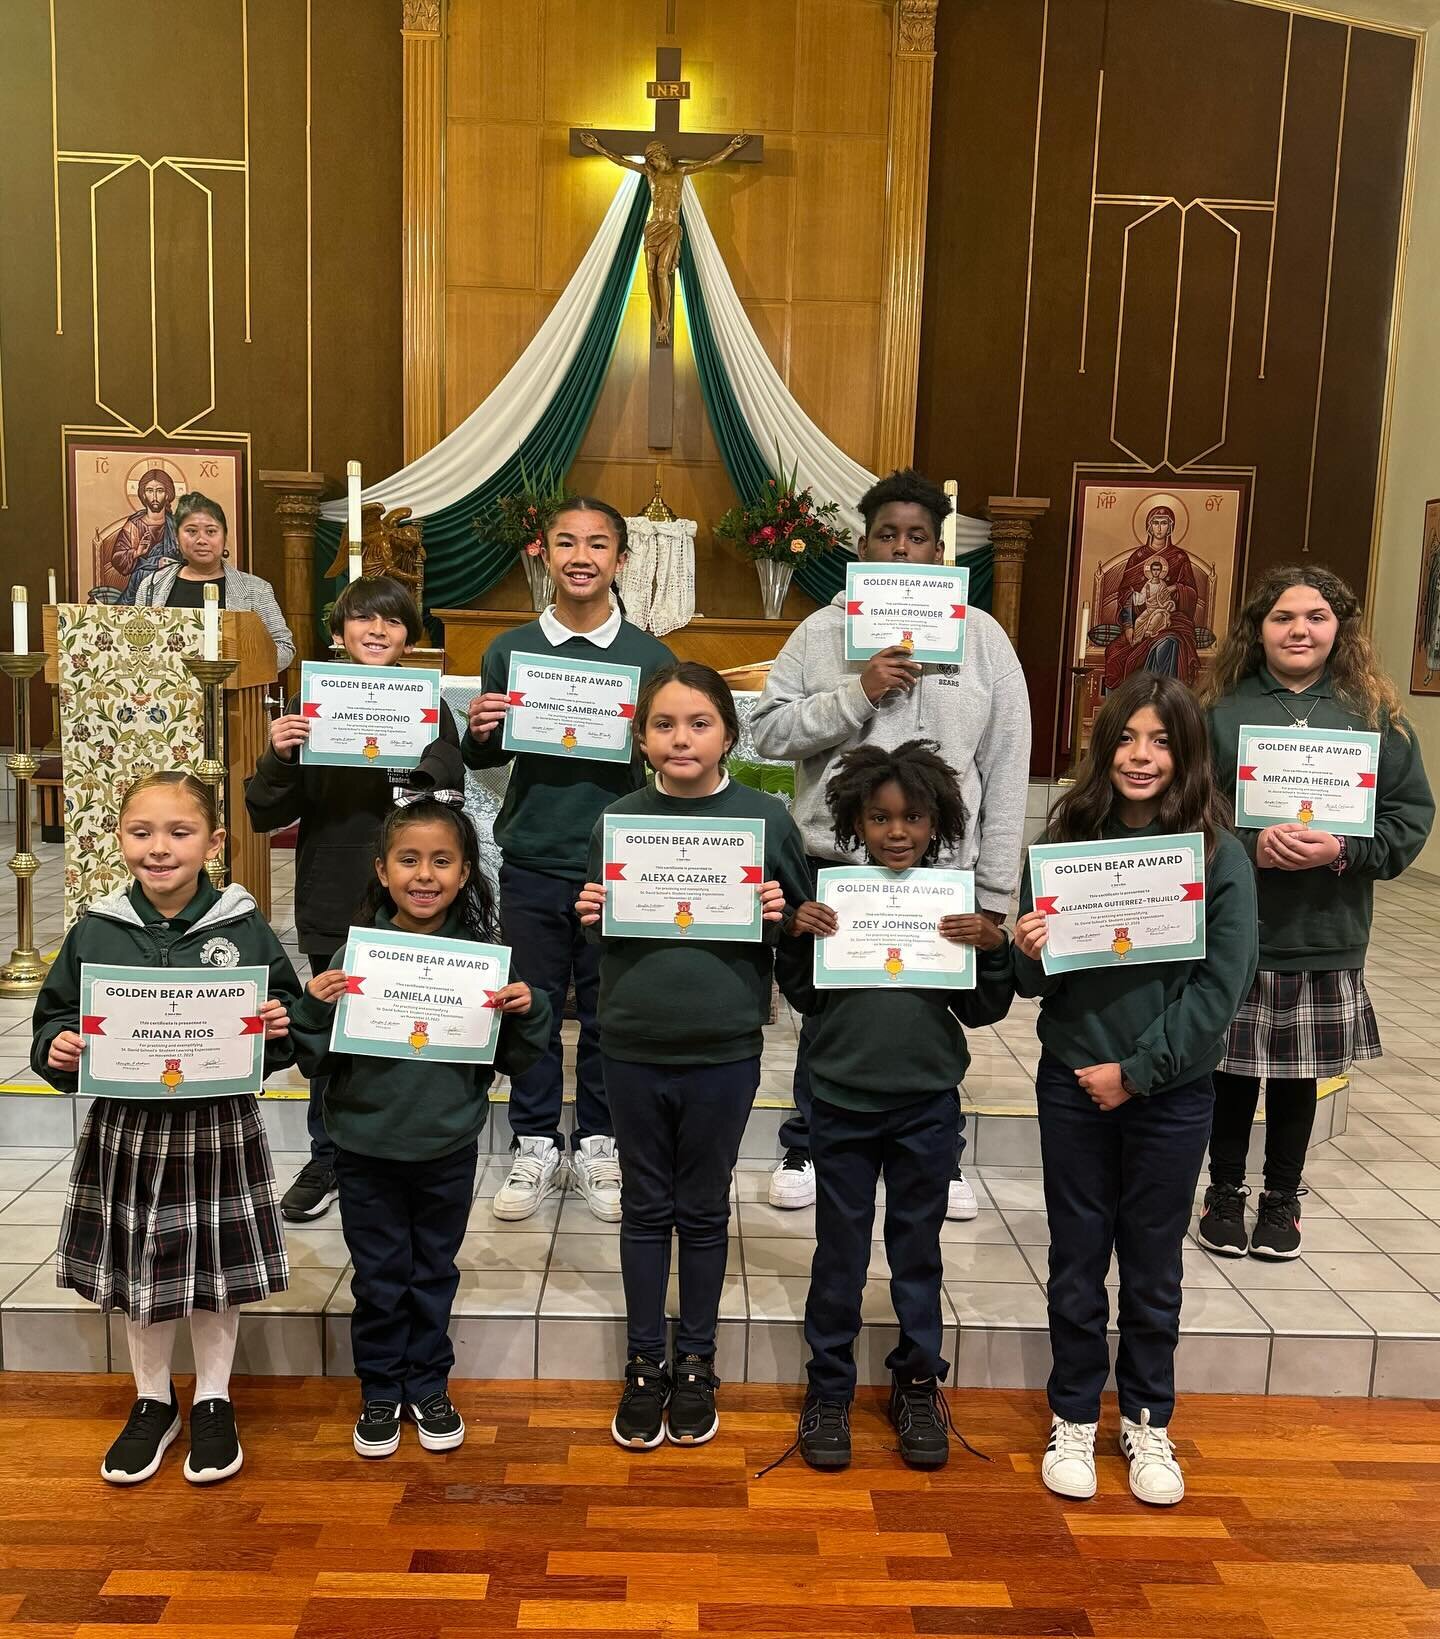 Congratulations to our Golden Bear award winners. Also know as our SLE awards, these students exemplify what it means to participate in our church community.